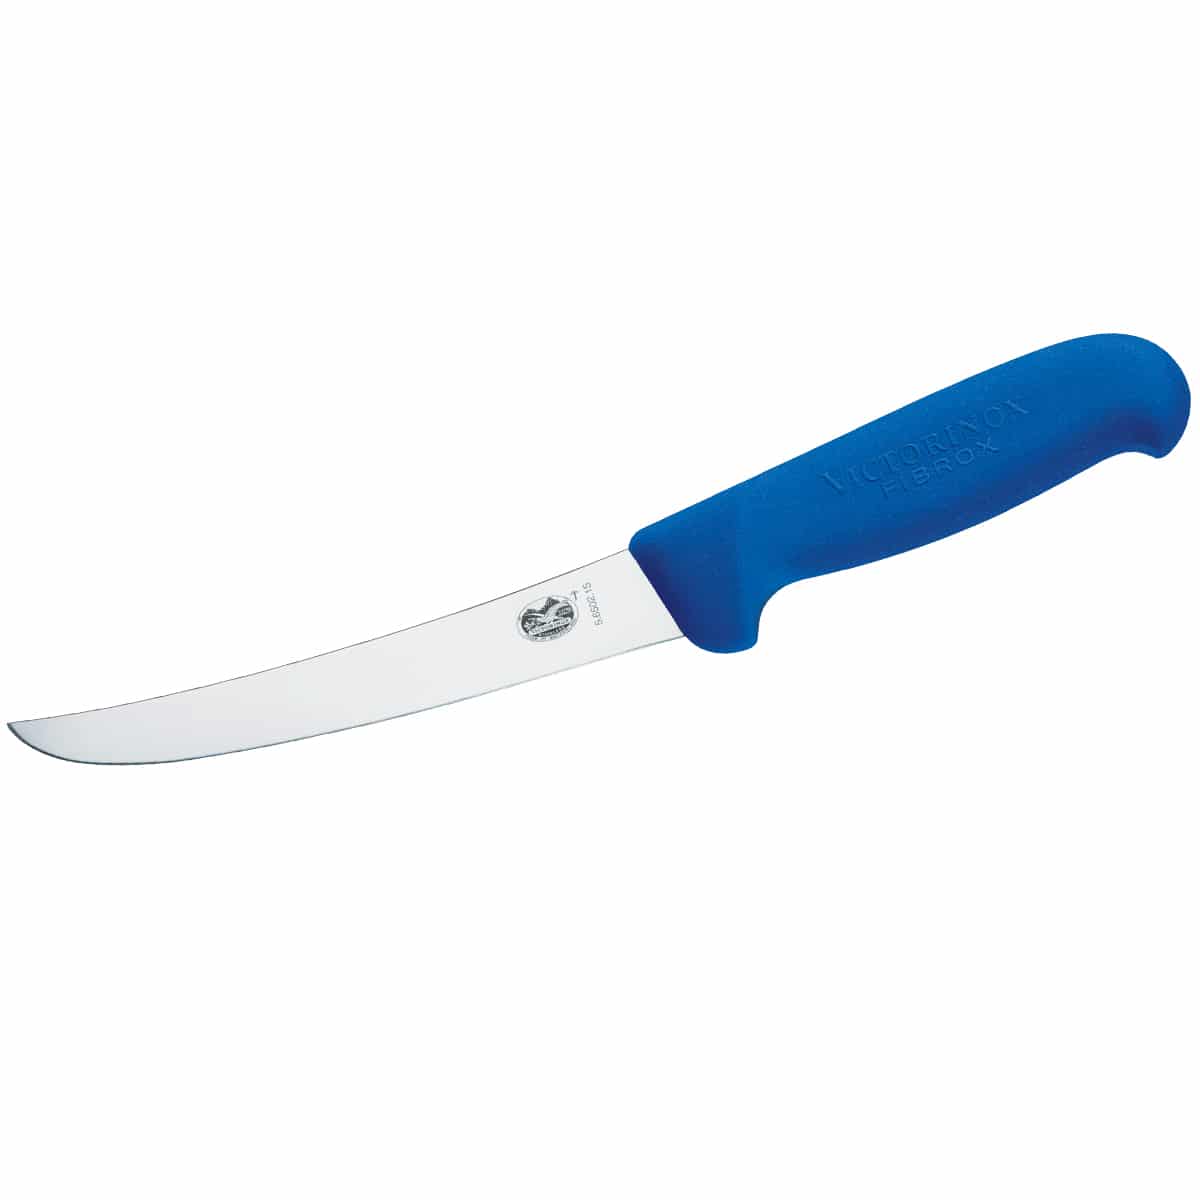 Victorinox Boning Knife, 15cm Curved and Wide Blade, with Blue Handle